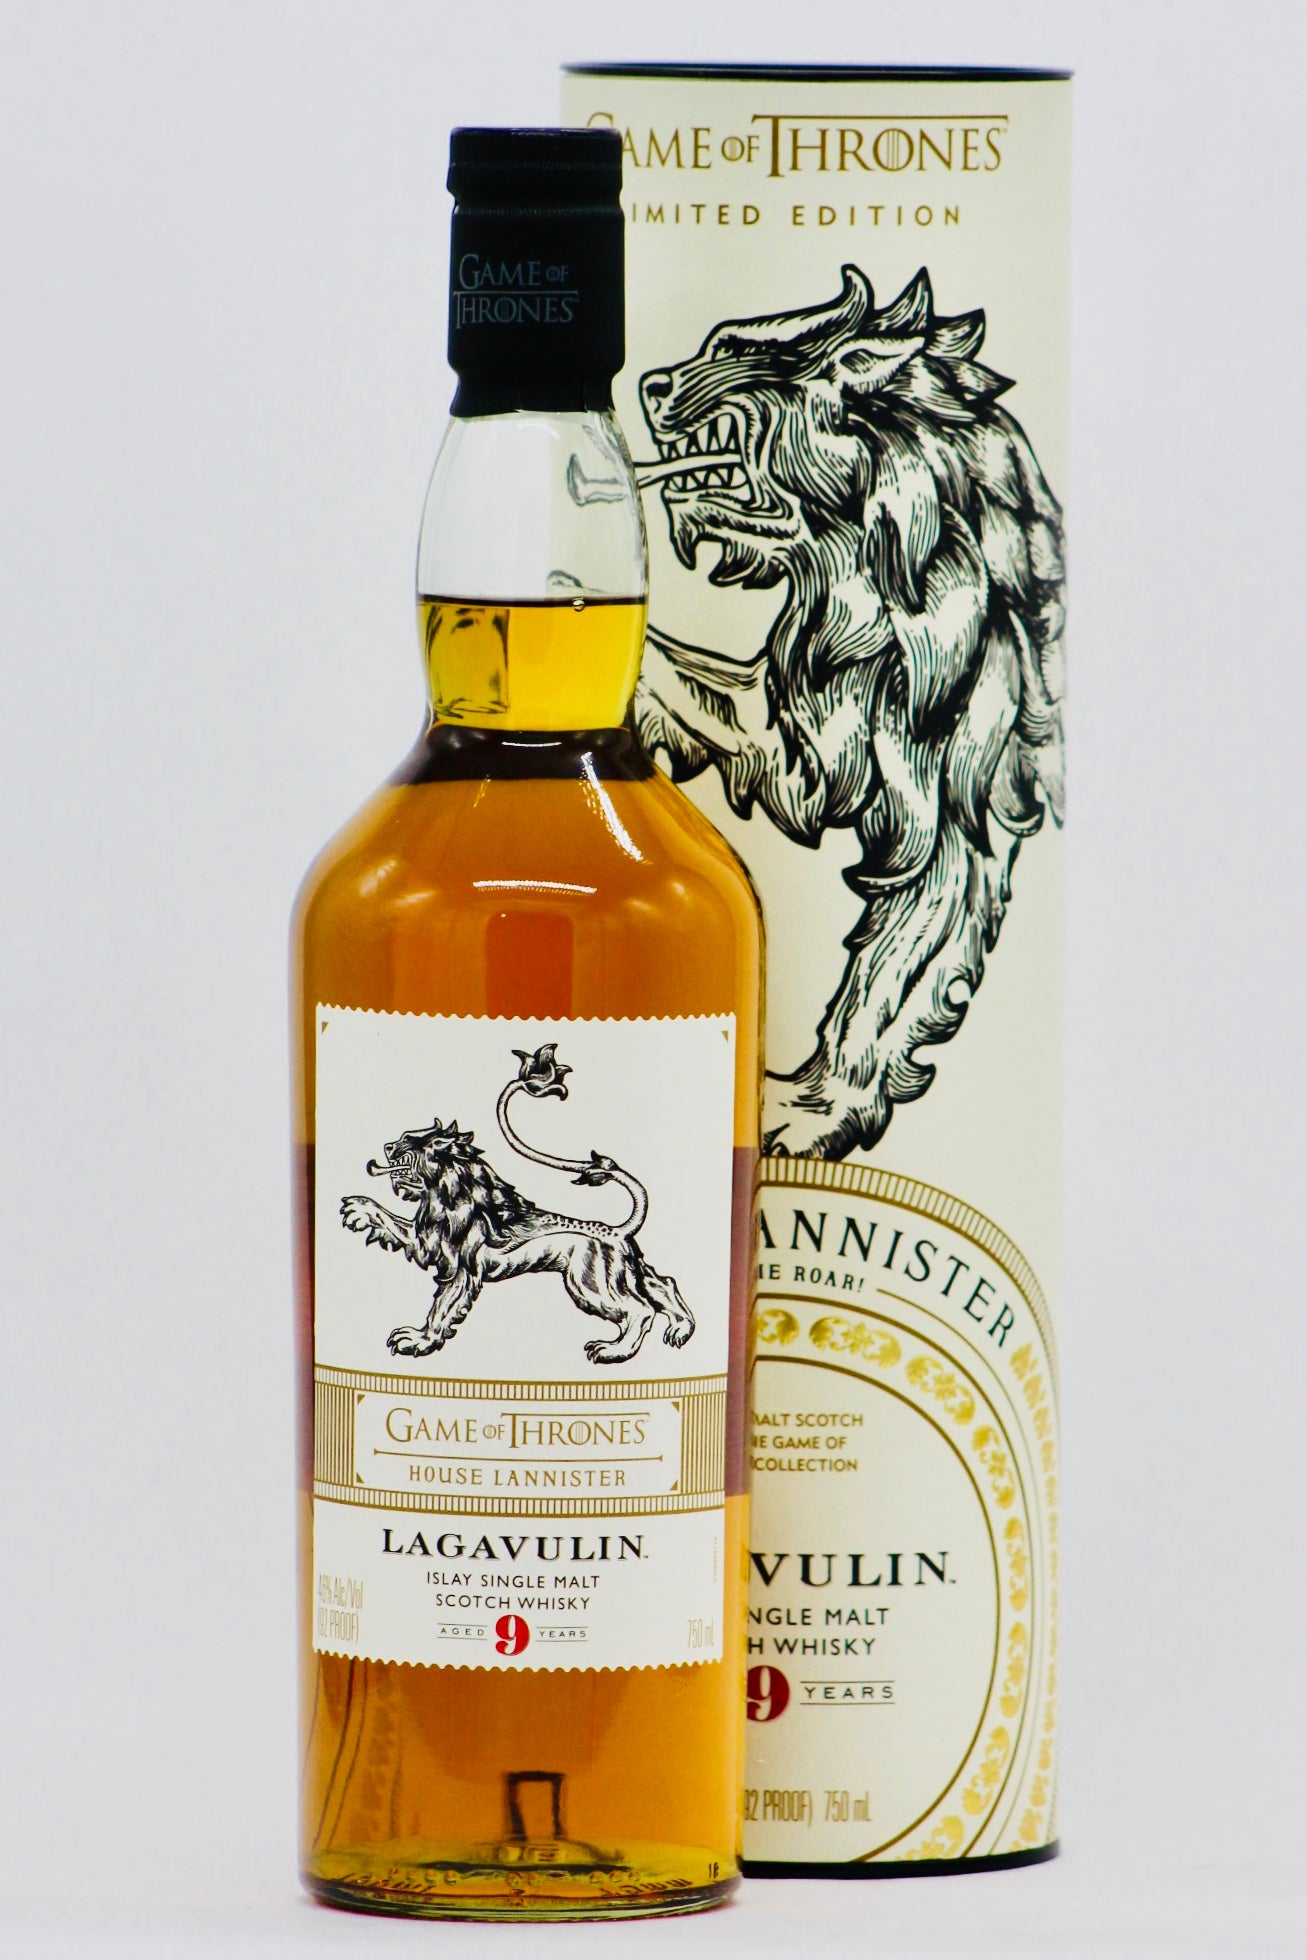 Game Of Thrones Lagavulin House Lannister 9 Years Old Single